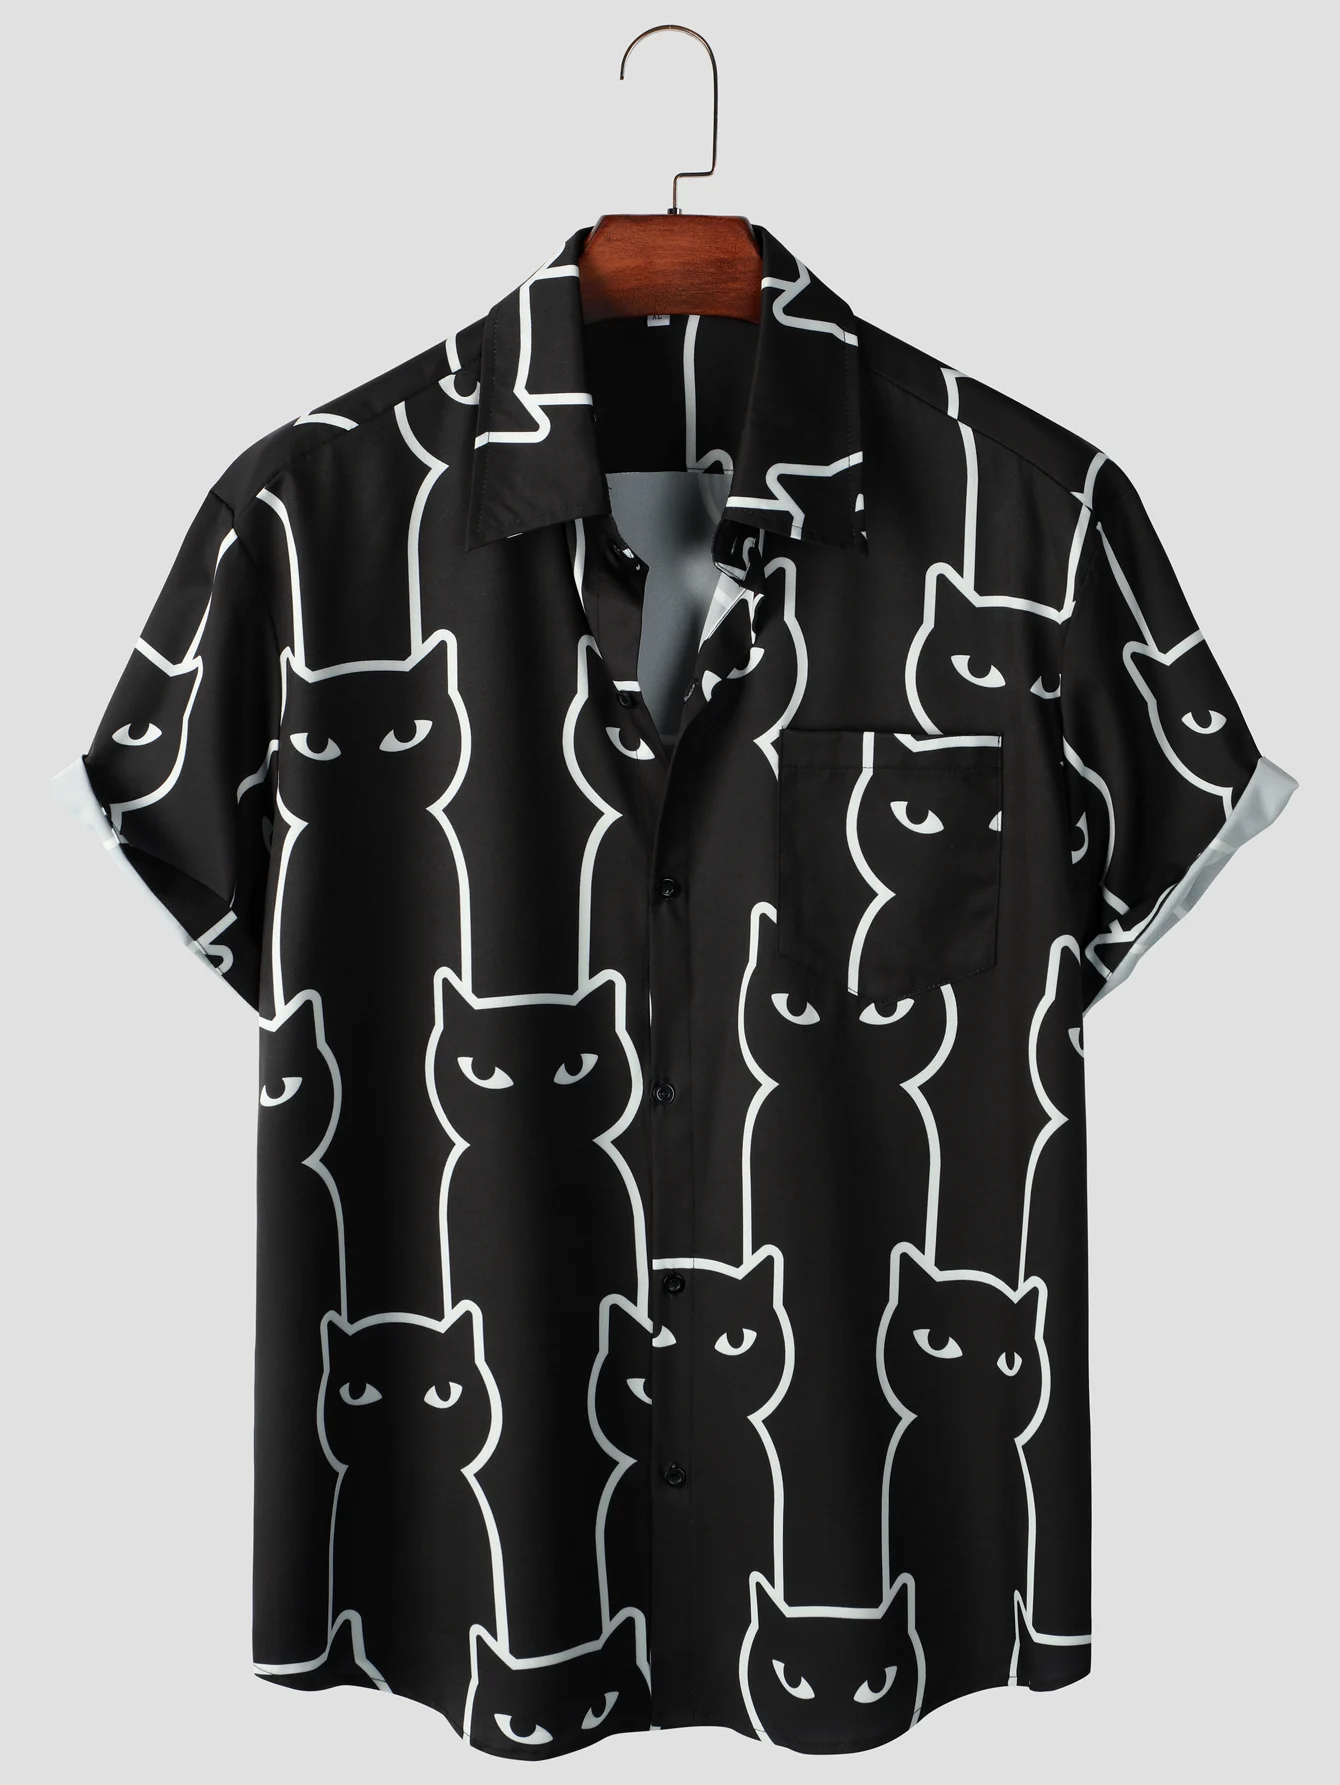 

Summer Casual Aloha Shirts with Cats Print - Button Up Short Sleeve Beach Shirts for Men